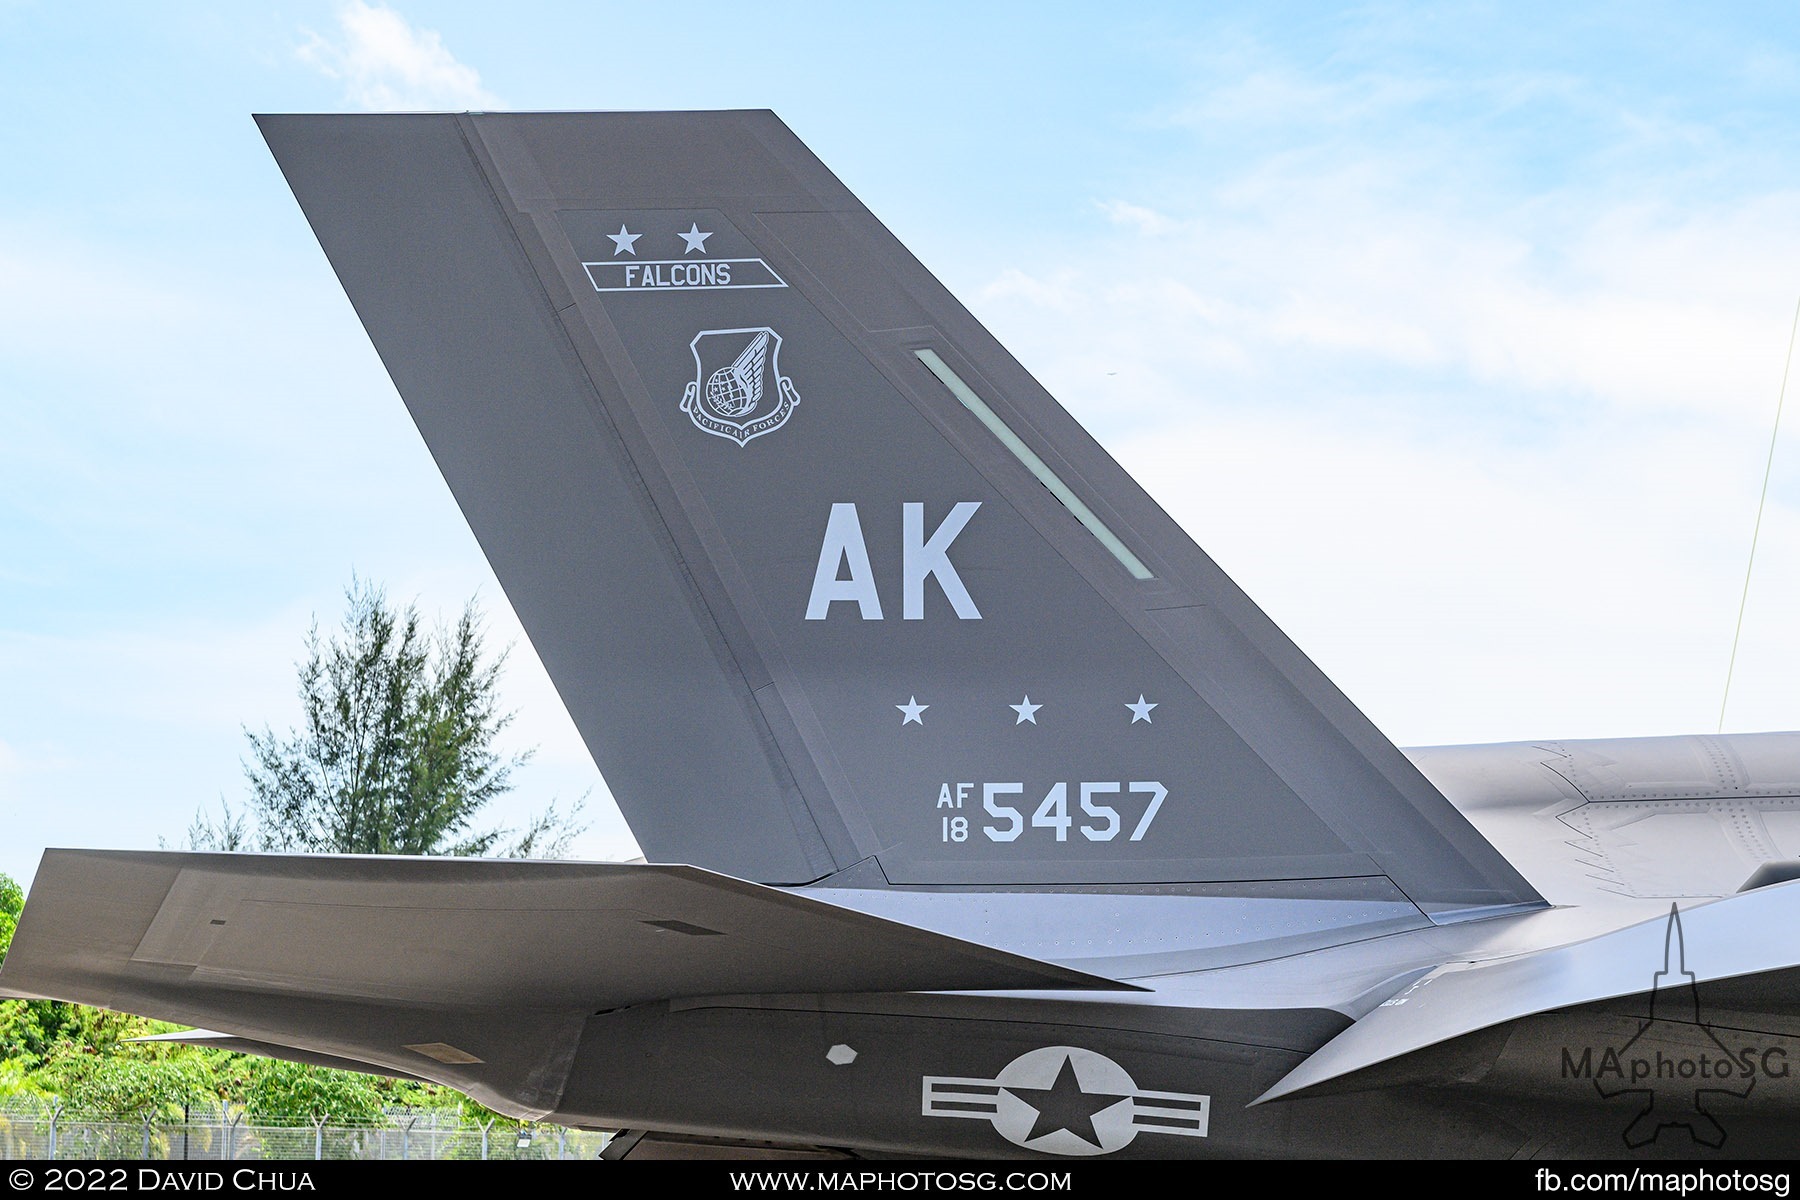 Tail detail of the F-35A